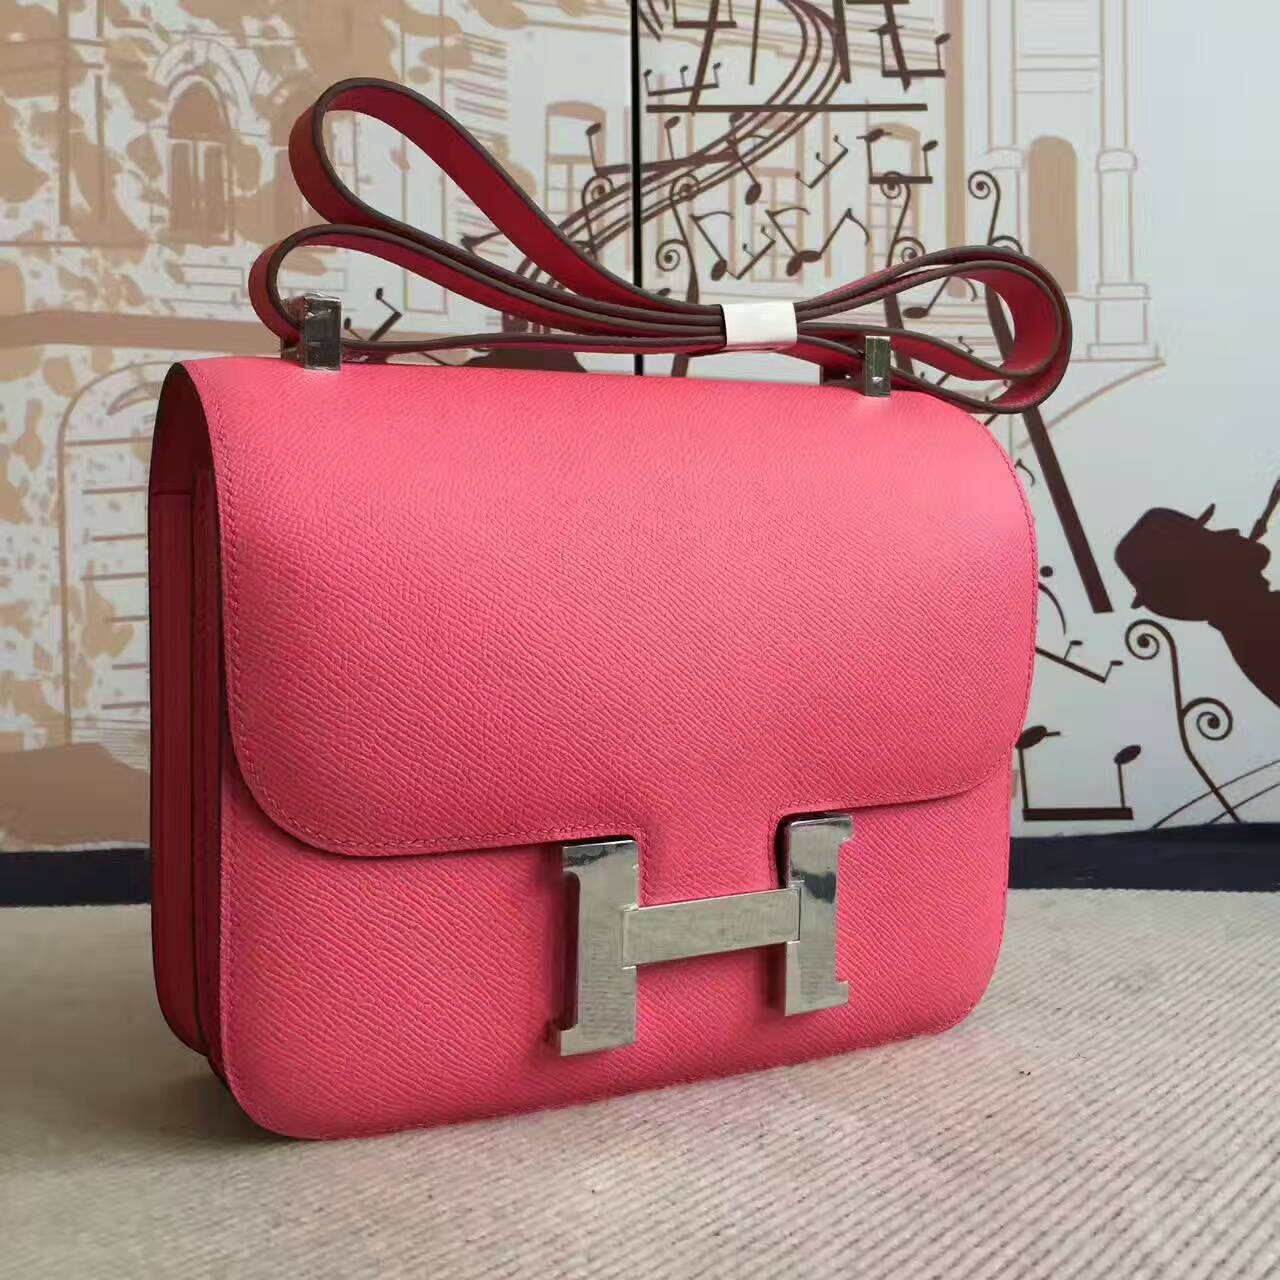 Hand Stitching Hermes Epsom Calfskin Leather Constance 24cm in 8W Rose Lipstick